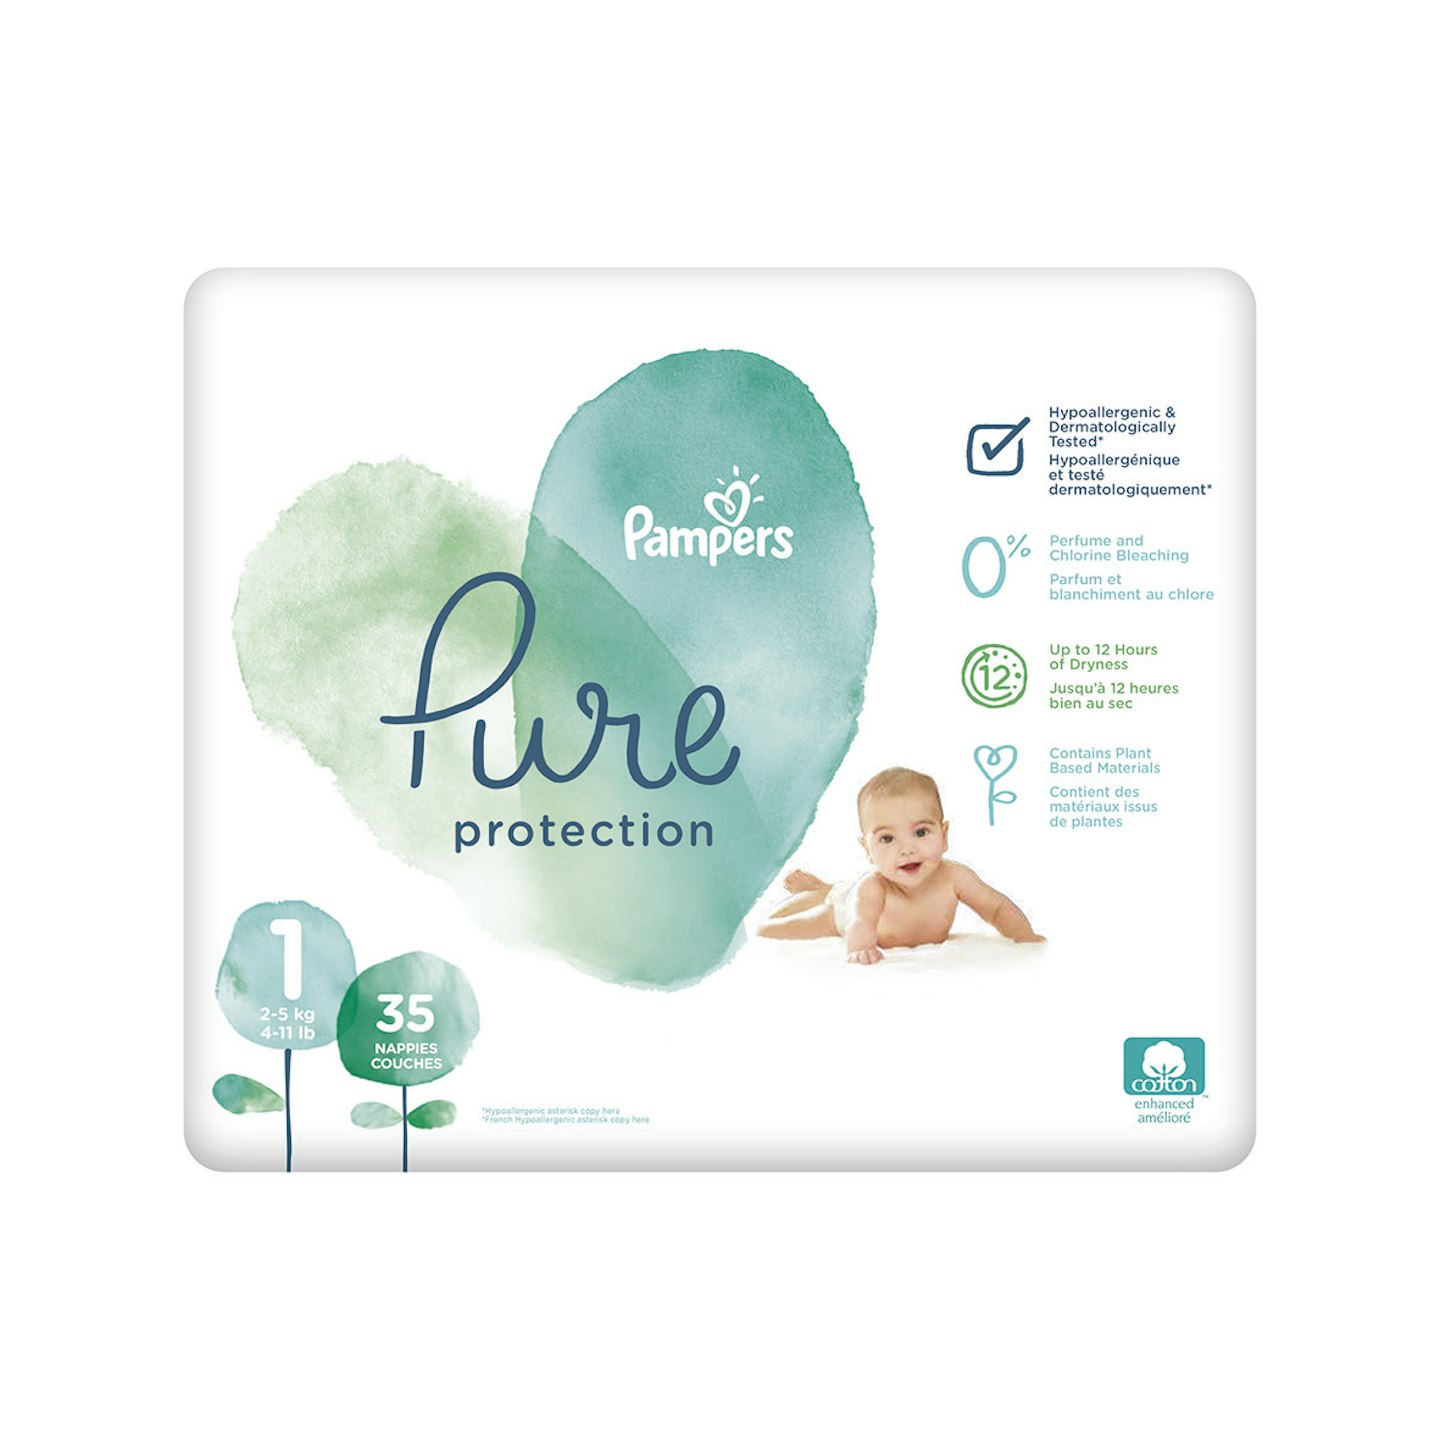 Pampers Pure Protection Nappies review